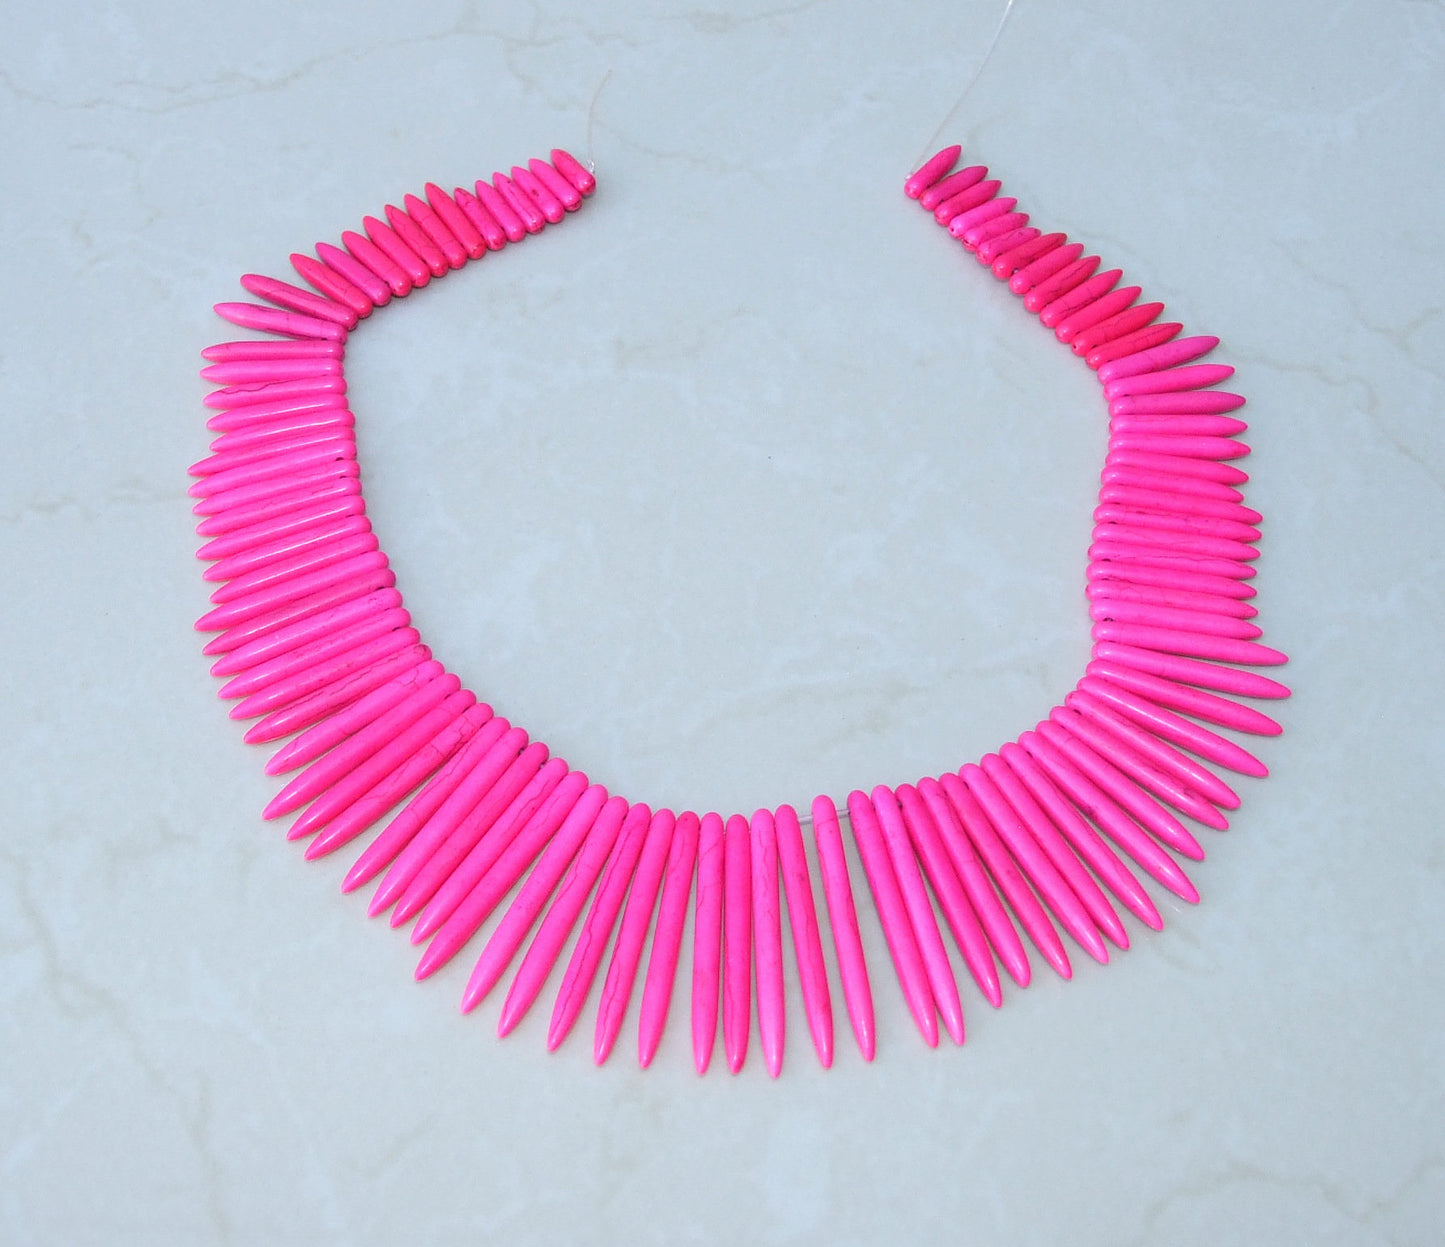 Hot Pink Turquoise, Spike Beads, Spike Collar, Spike Choker Necklace, Turquoise Spike Necklace, Statement Necklace, Spike Bib Necklace, 50mm